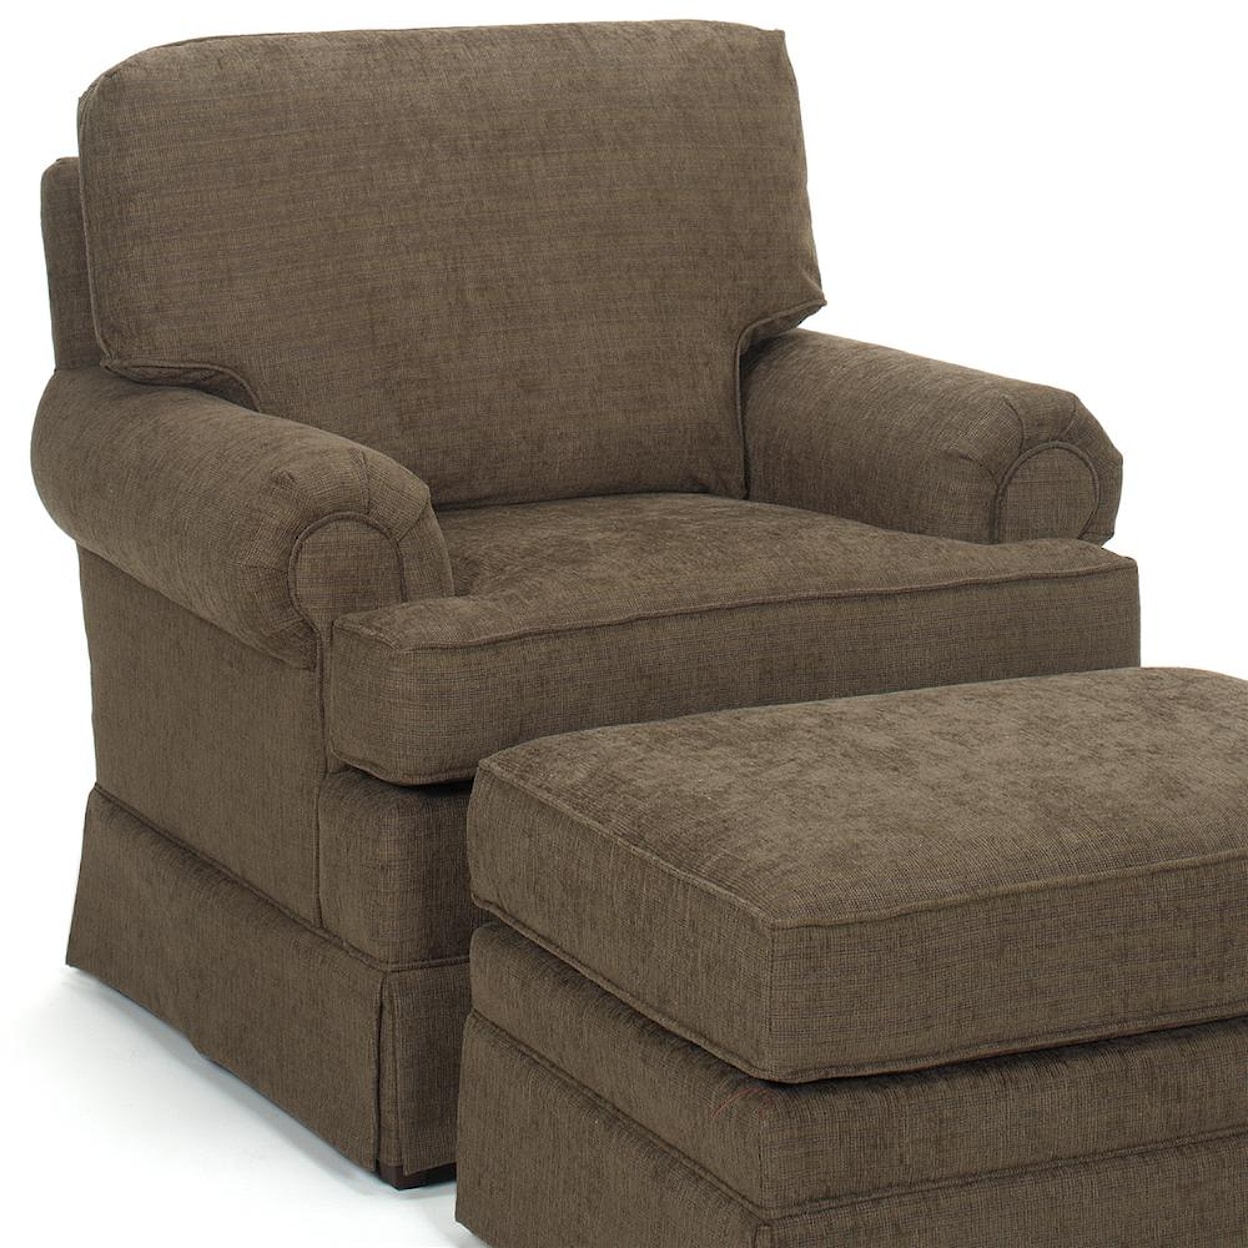 Temple Furniture America Upholstered Chair